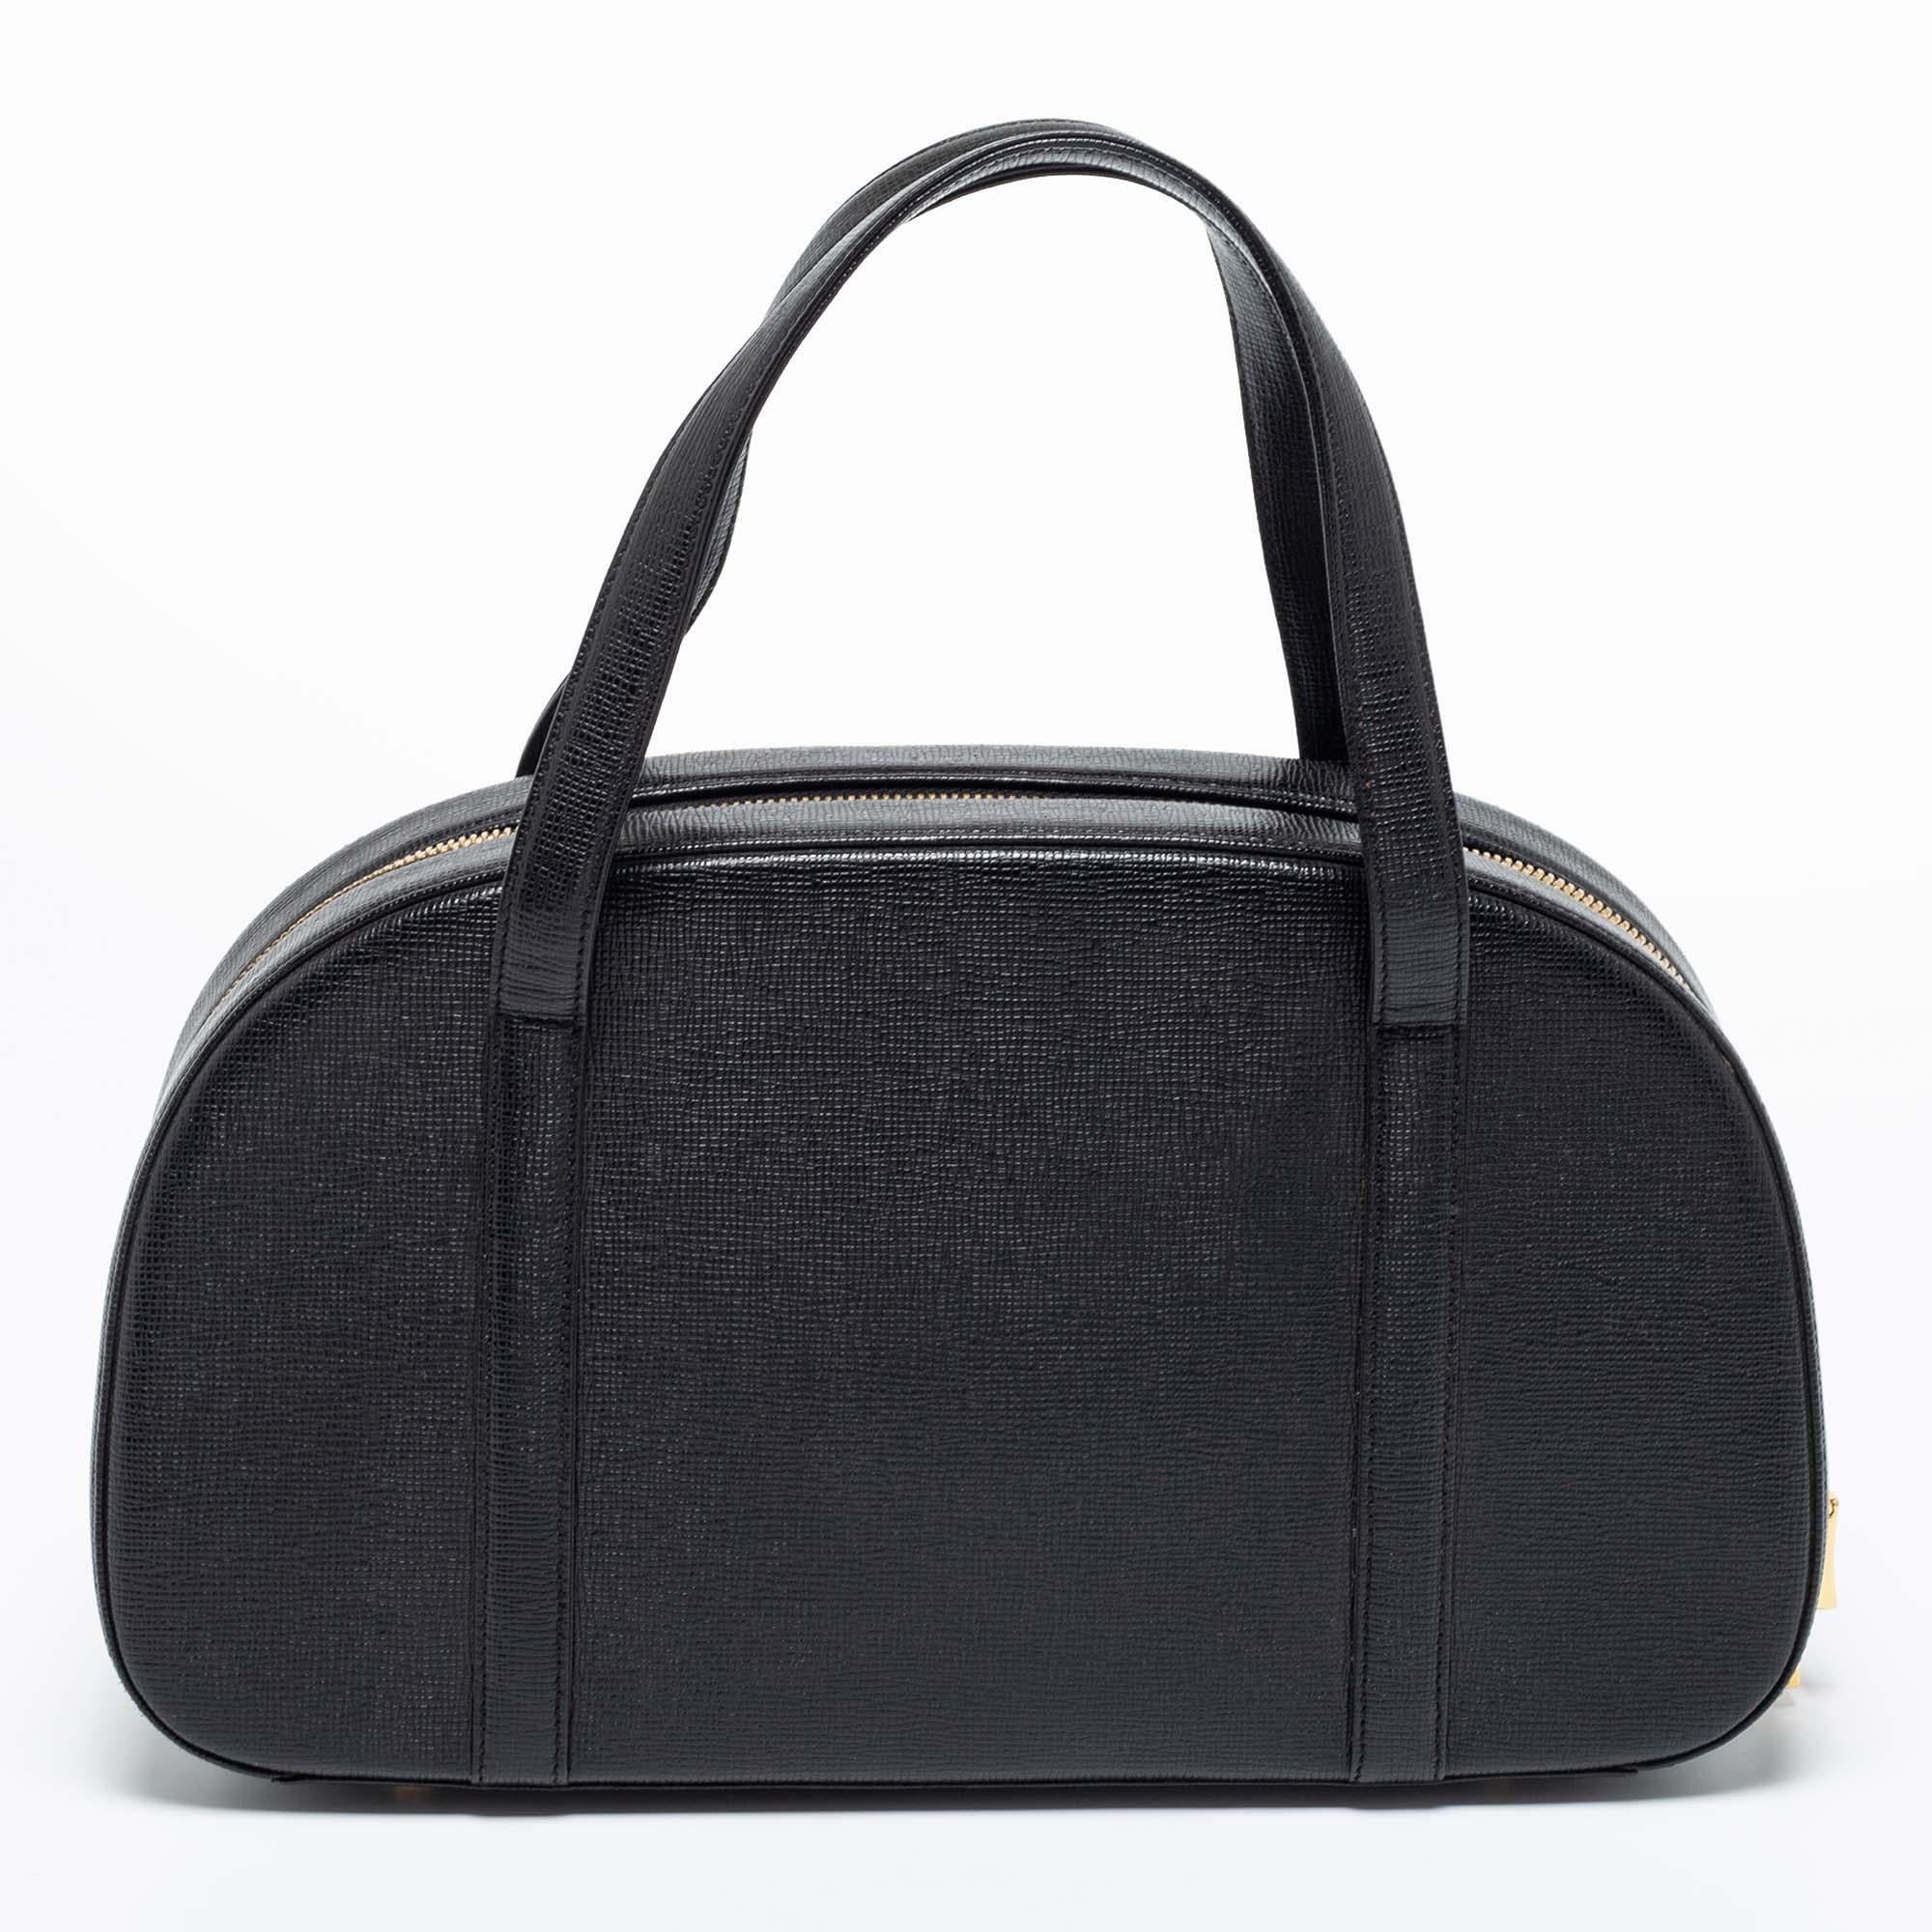 Simple details, high quality, and everyday convenience mark this bag by MCM. The bag is made of black leather and it features dual handles, gold-tone metal accents, and a spacious interior.

Includes: Original Dustbag